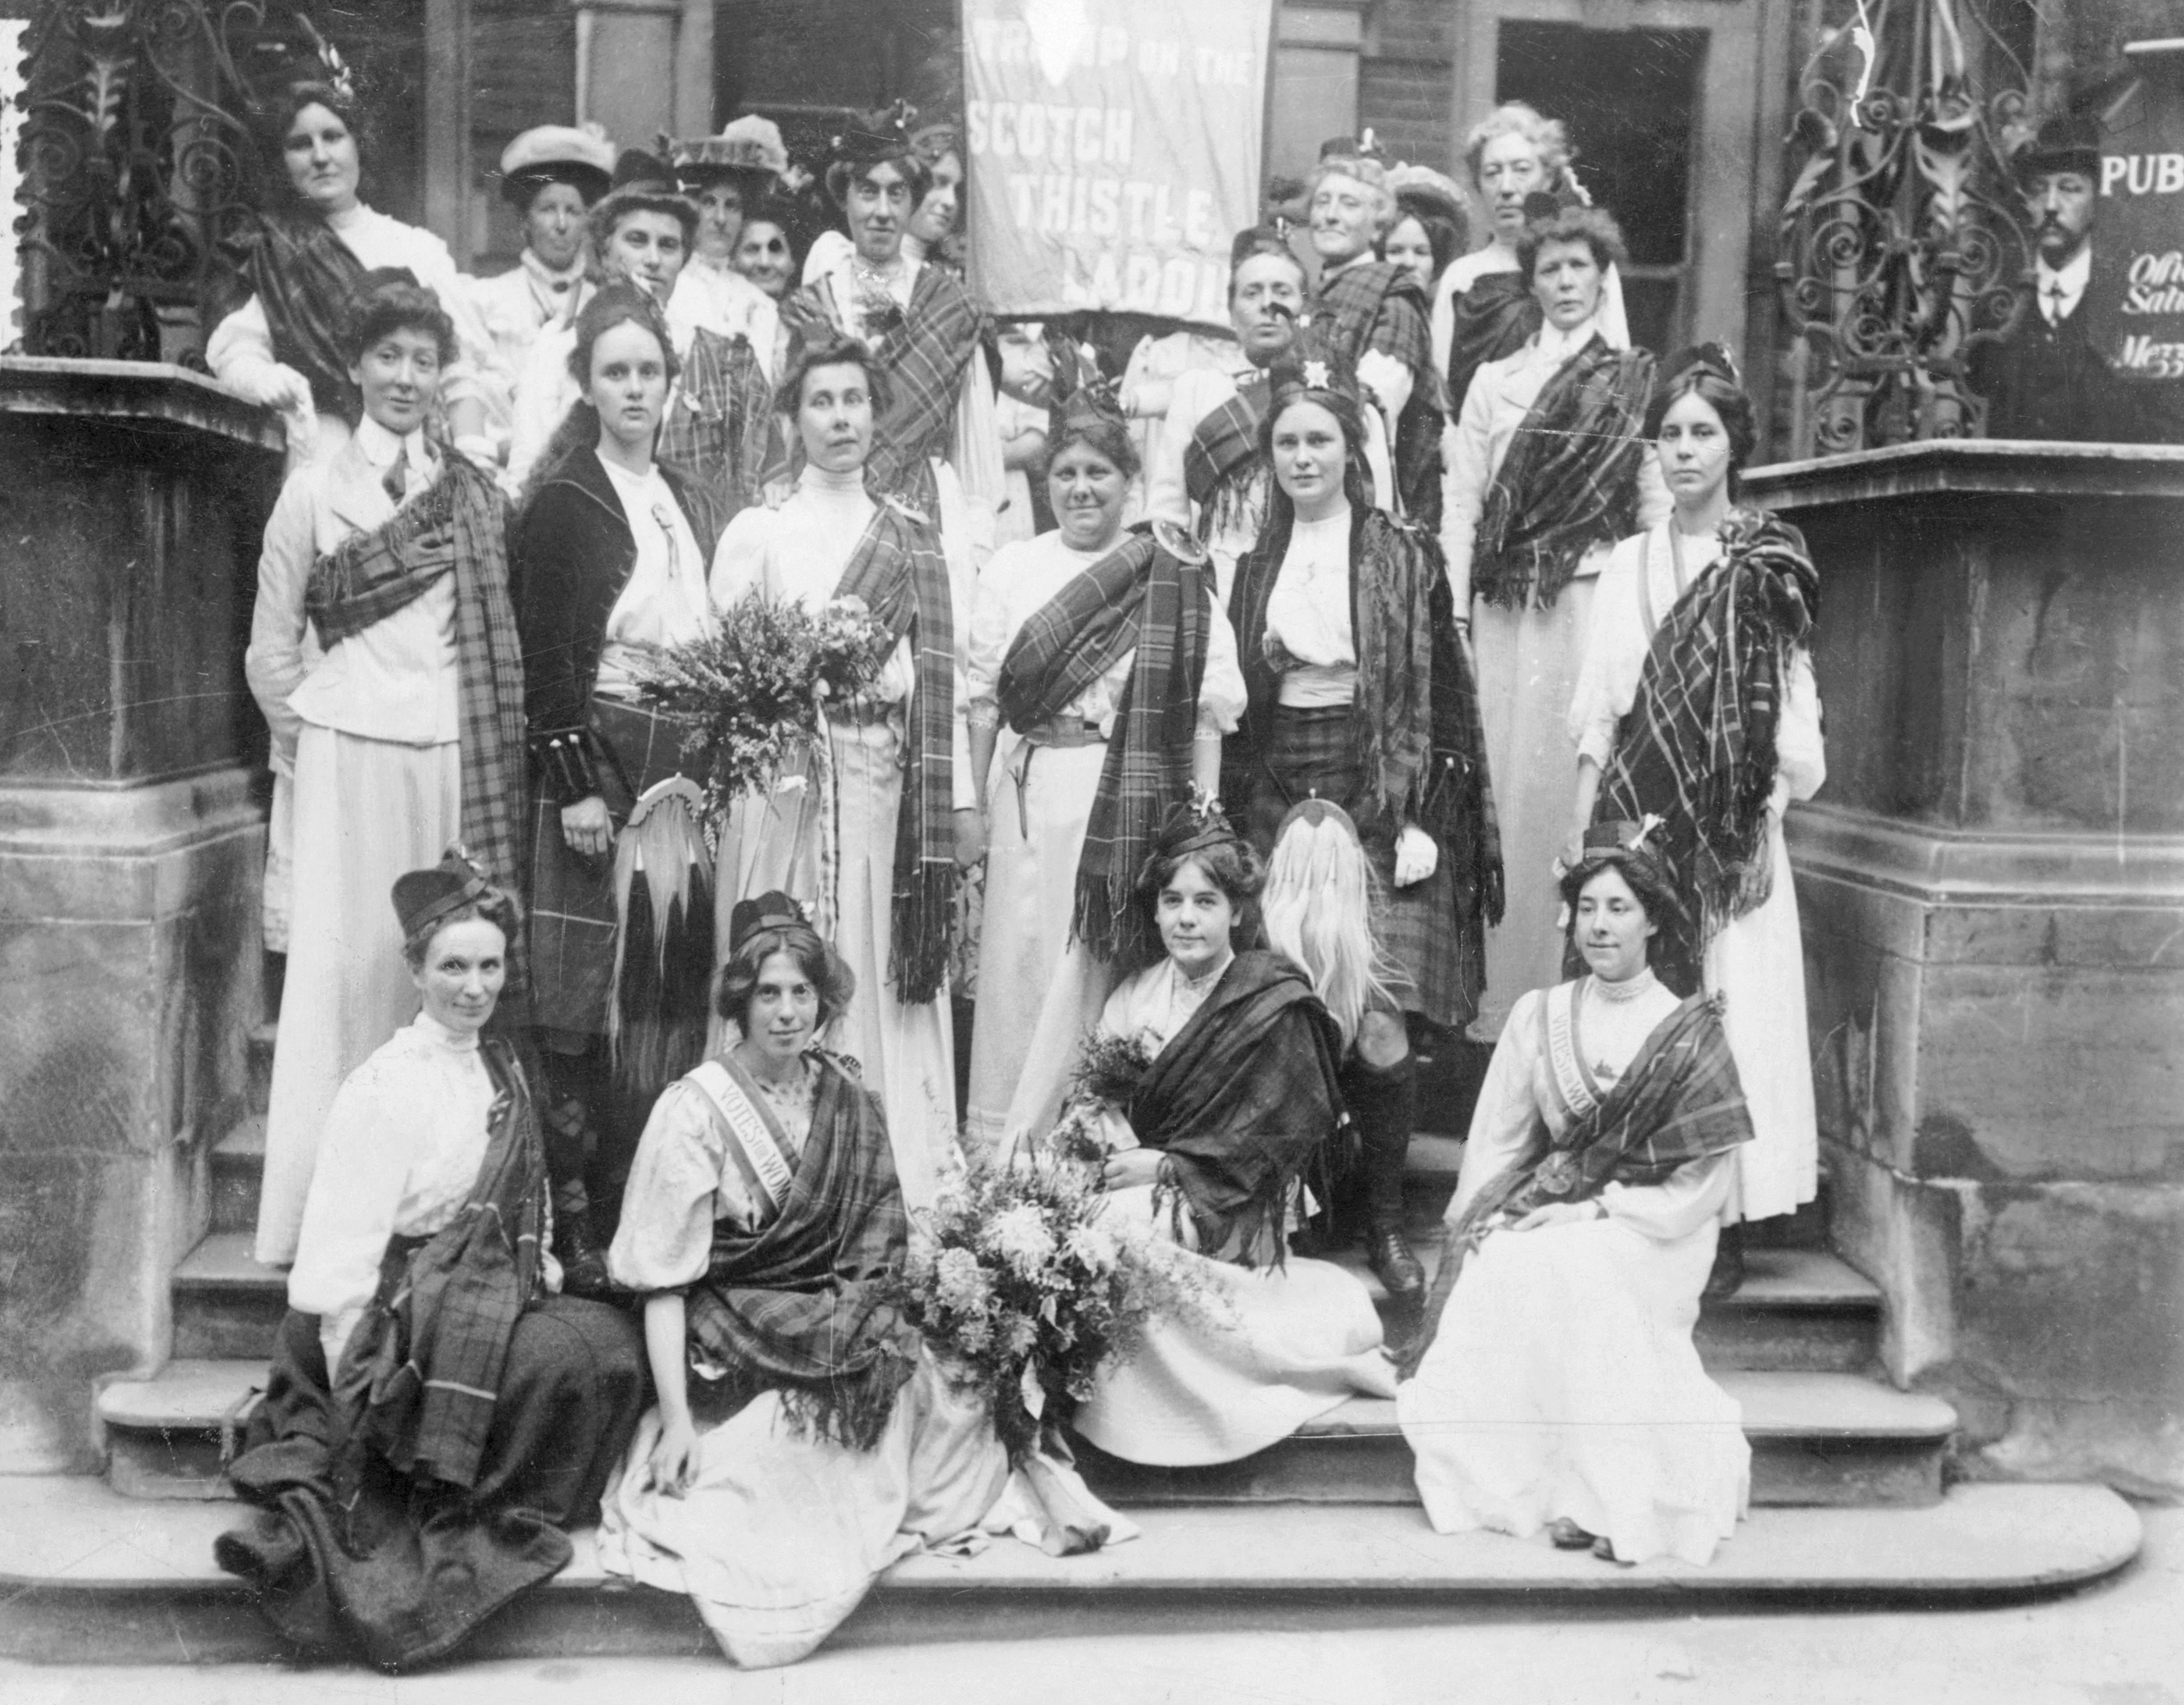 Scottish suffragettes welcoming Mary Phillips (standing third from left) on her release from Holloway Gaol, August 23 1908. Mary Phillips had been sent to prison for obstructing the police in Parliament Square on June 30. 'General' Drummond stands next to her in the centre of the photograph. (Photo by Museum of London/Heritage Images/Getty Images)